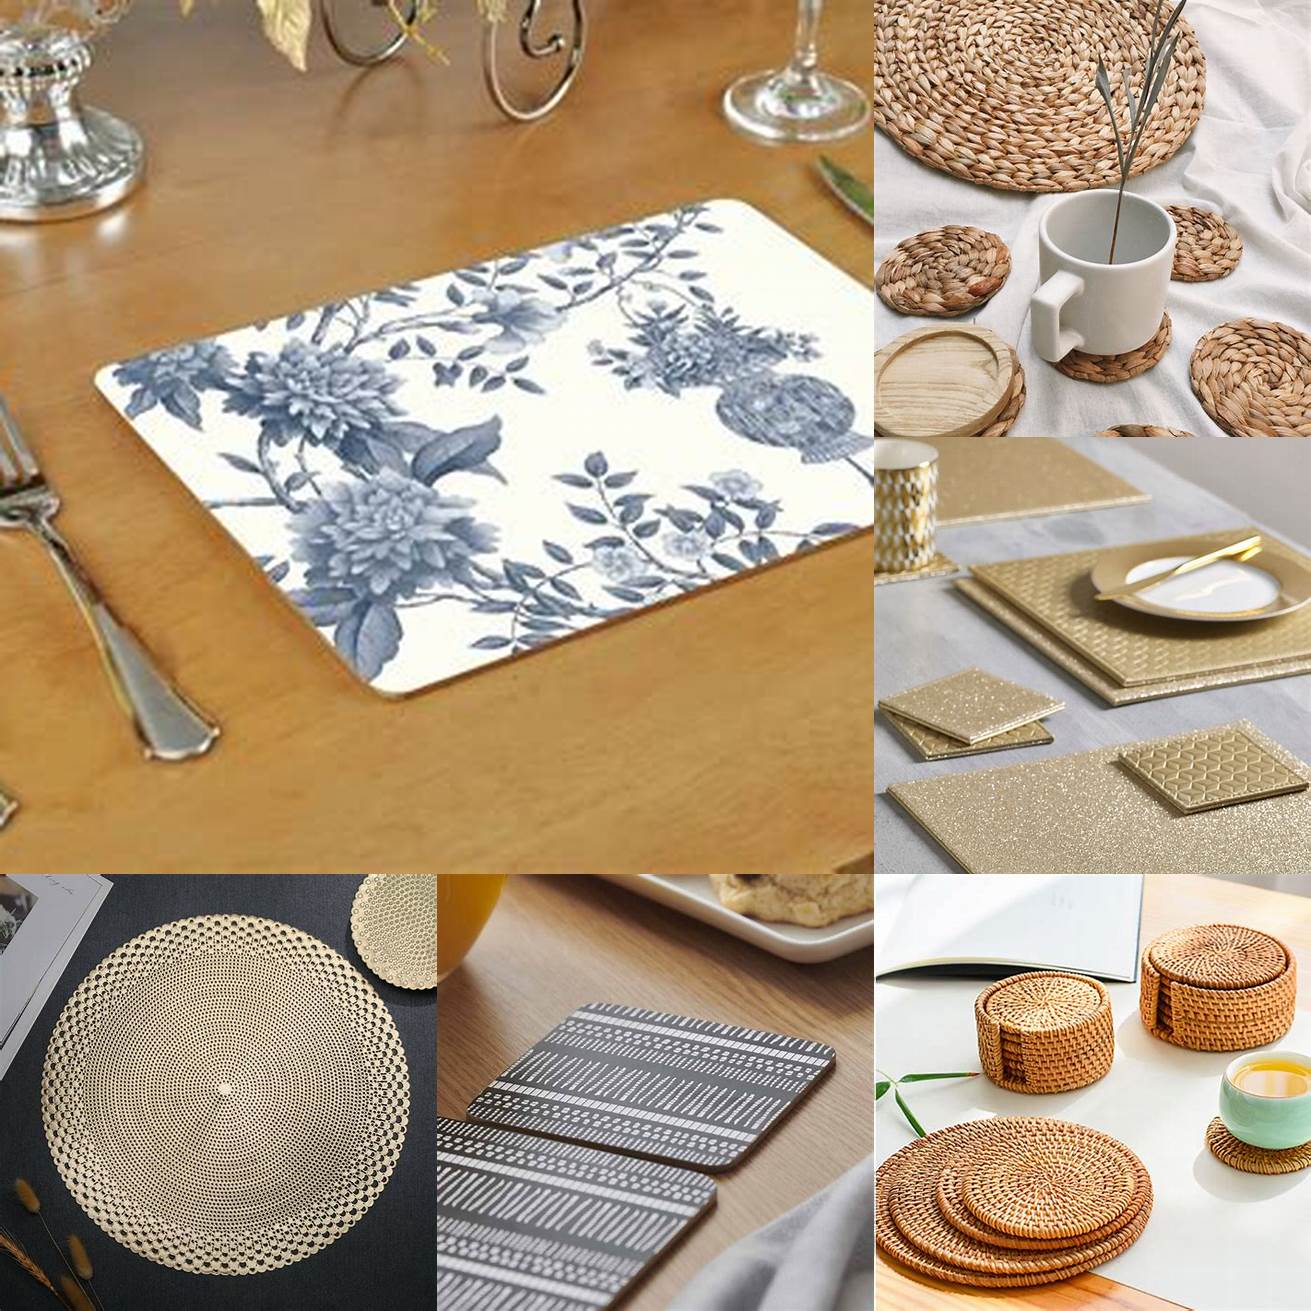 Use coasters and placemats